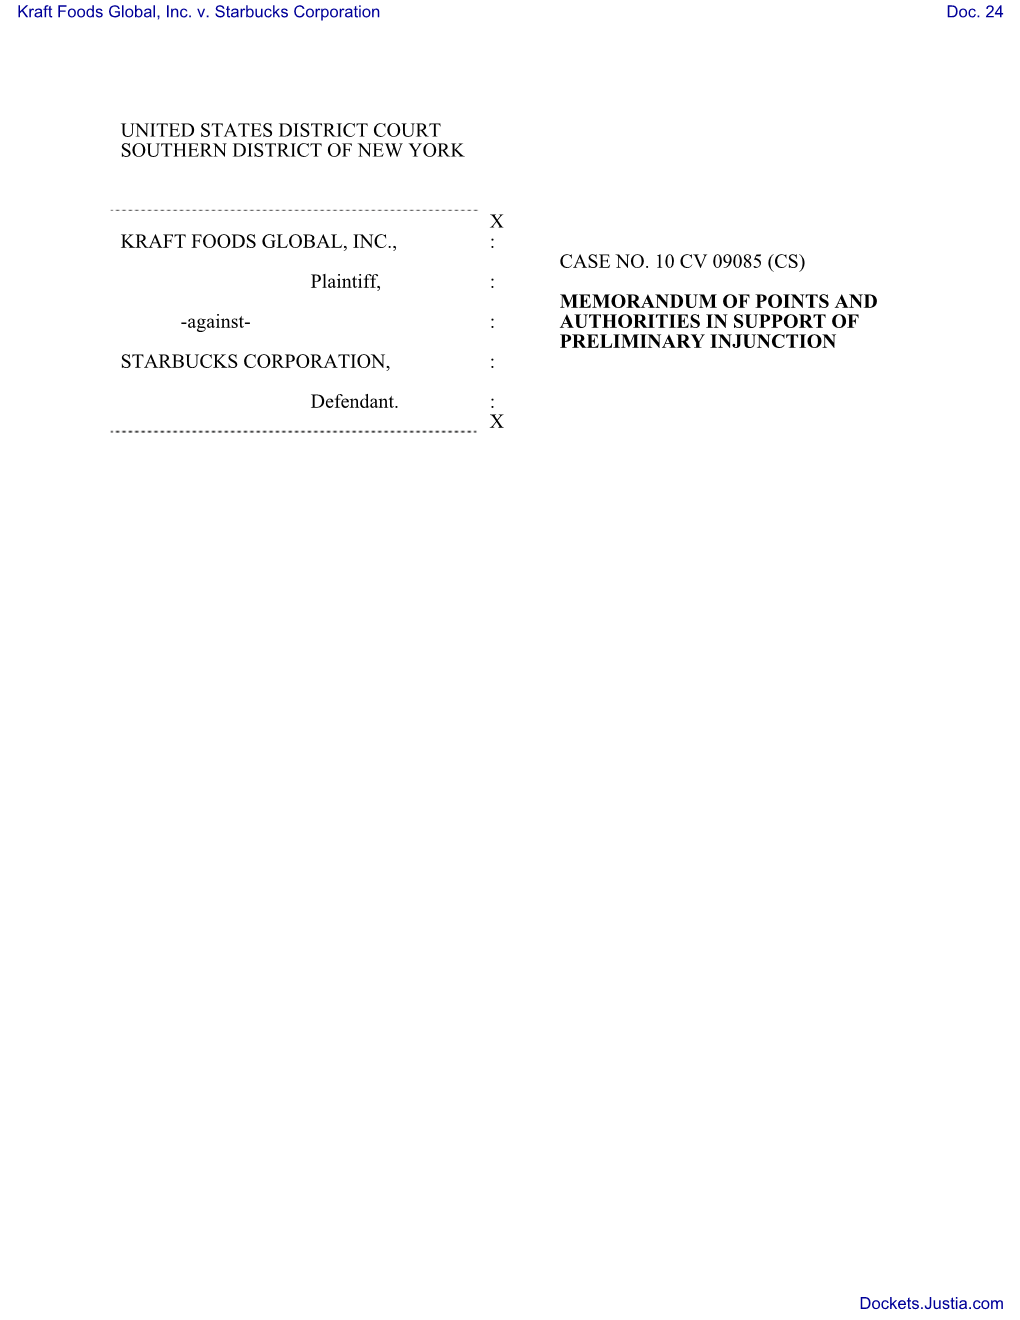 15 MOTION for Preliminary Injunction.. Document Filed by Kraft